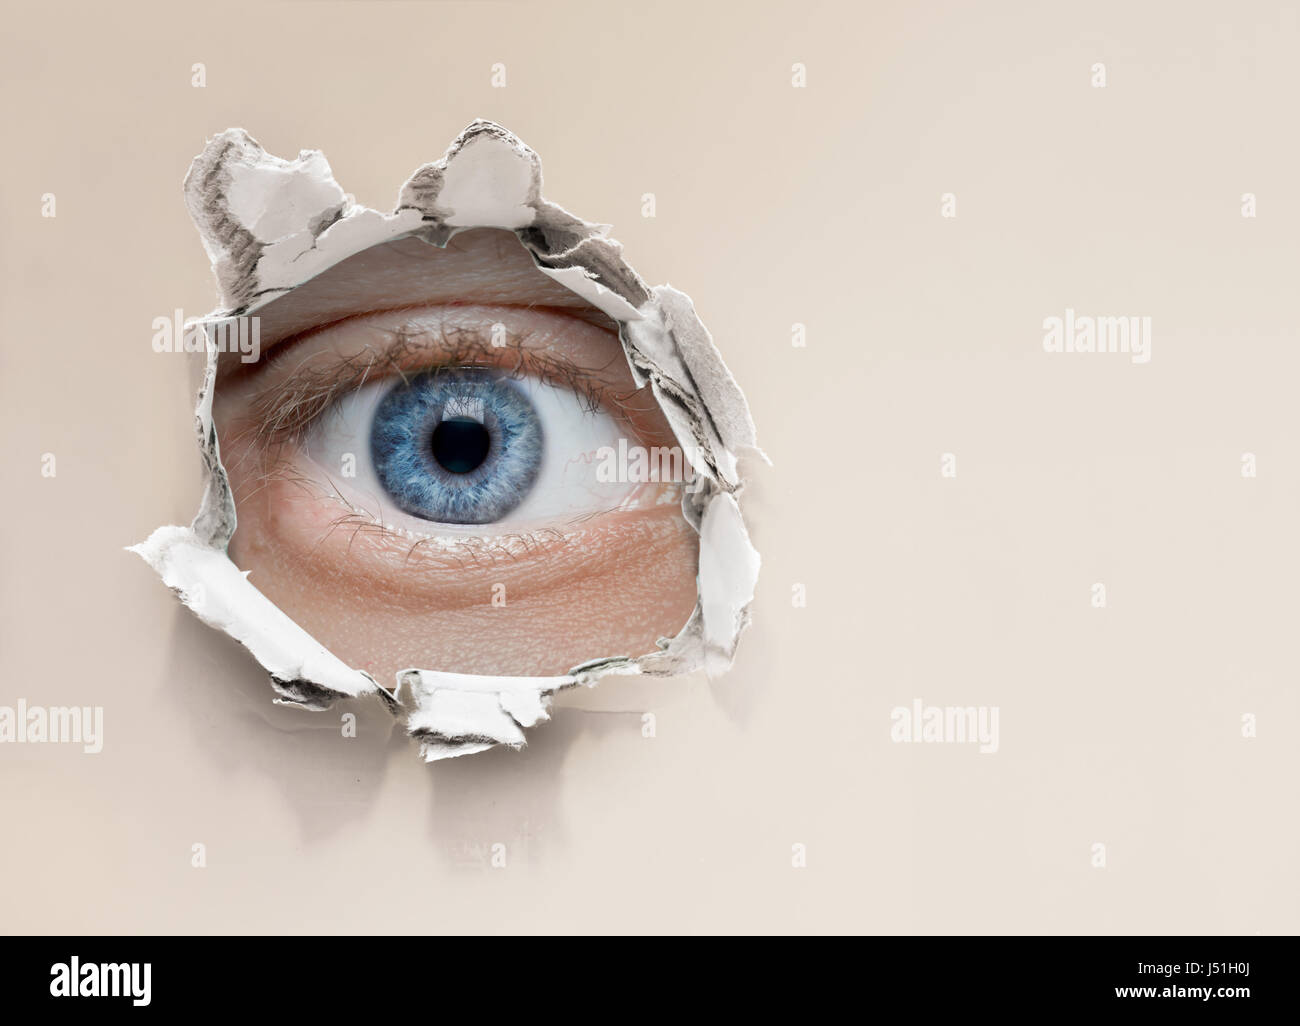 eye looking through hole in wall Stock Photo